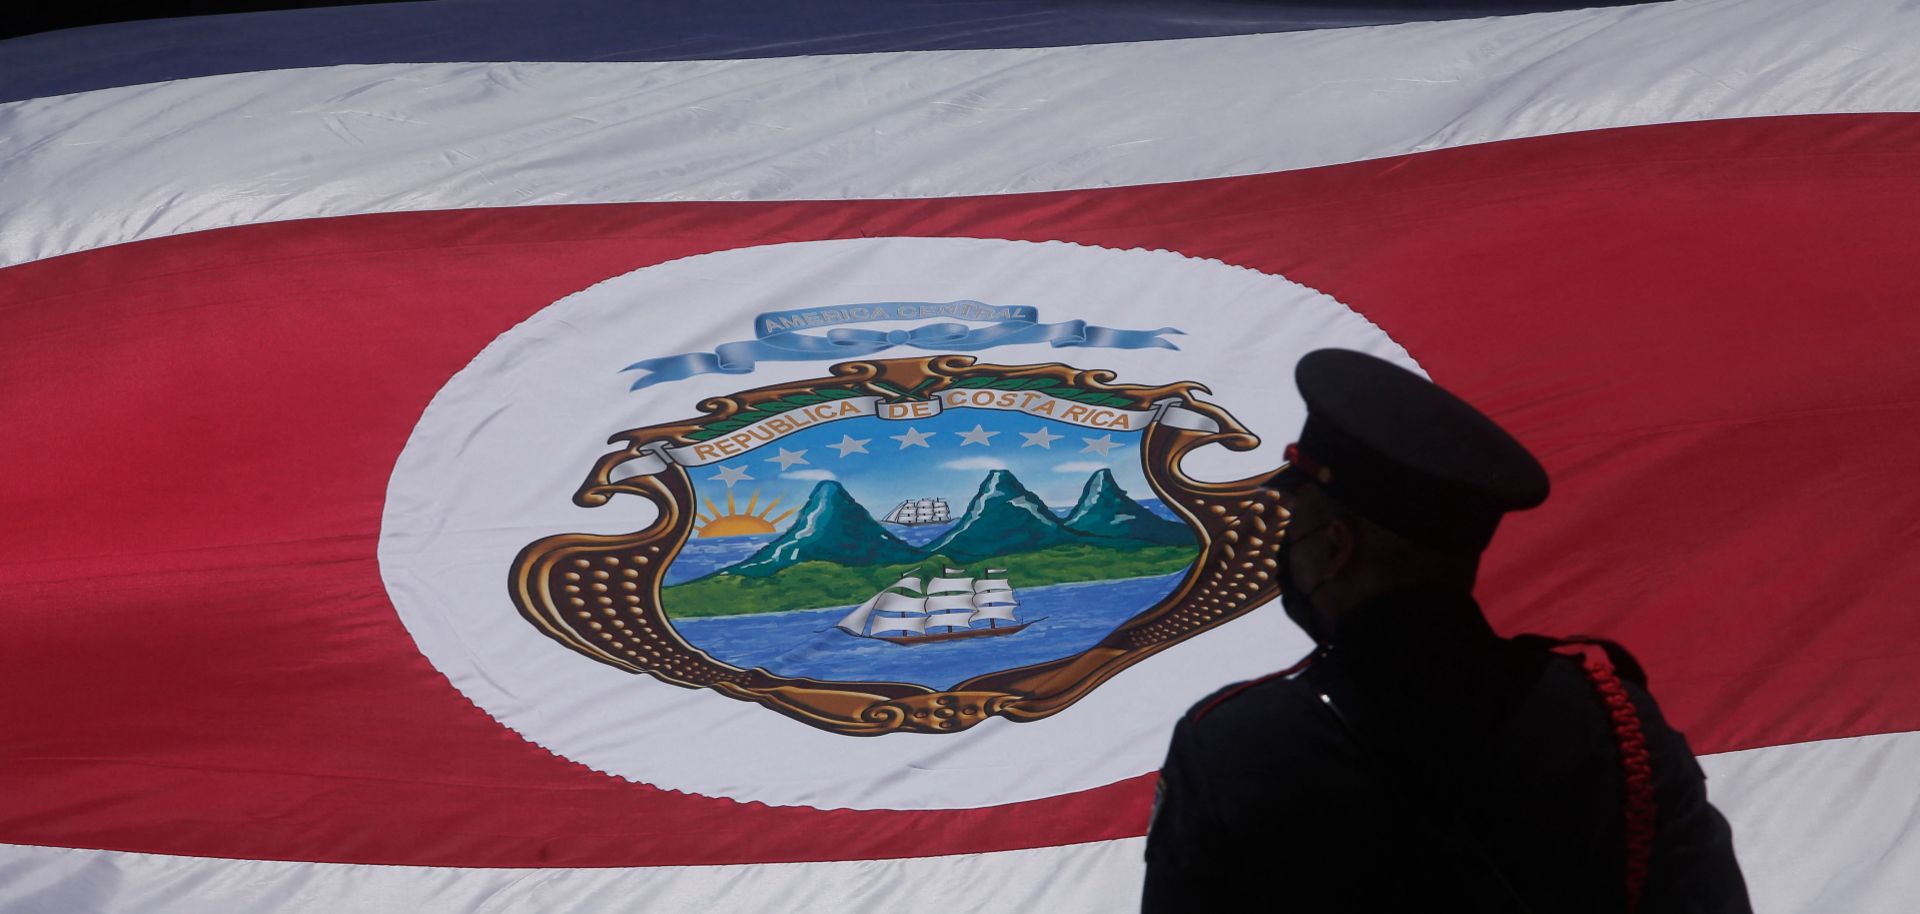 A guard stands next to a Costa Rican flag during the inauguration ceremony of the country’s new president Rodrigo Chaves in San Jose on May 8, 2022.